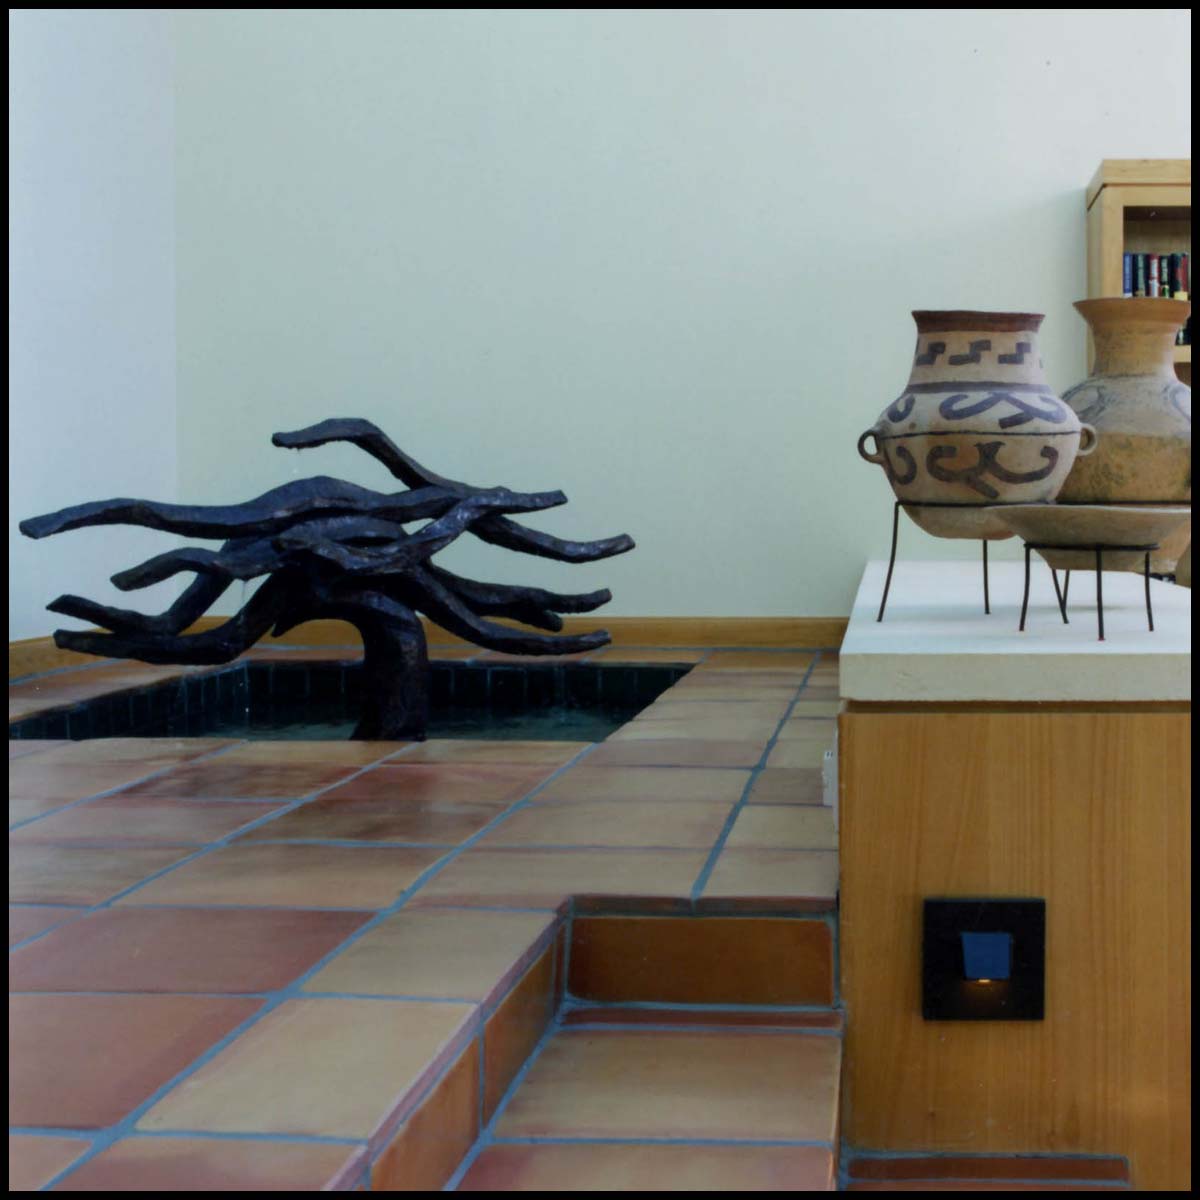 photo of bronze-colored small indoor fountain with flowing shapes, in white-walled room with tiled floor, tiled steps, and wooden shelves and bookcases